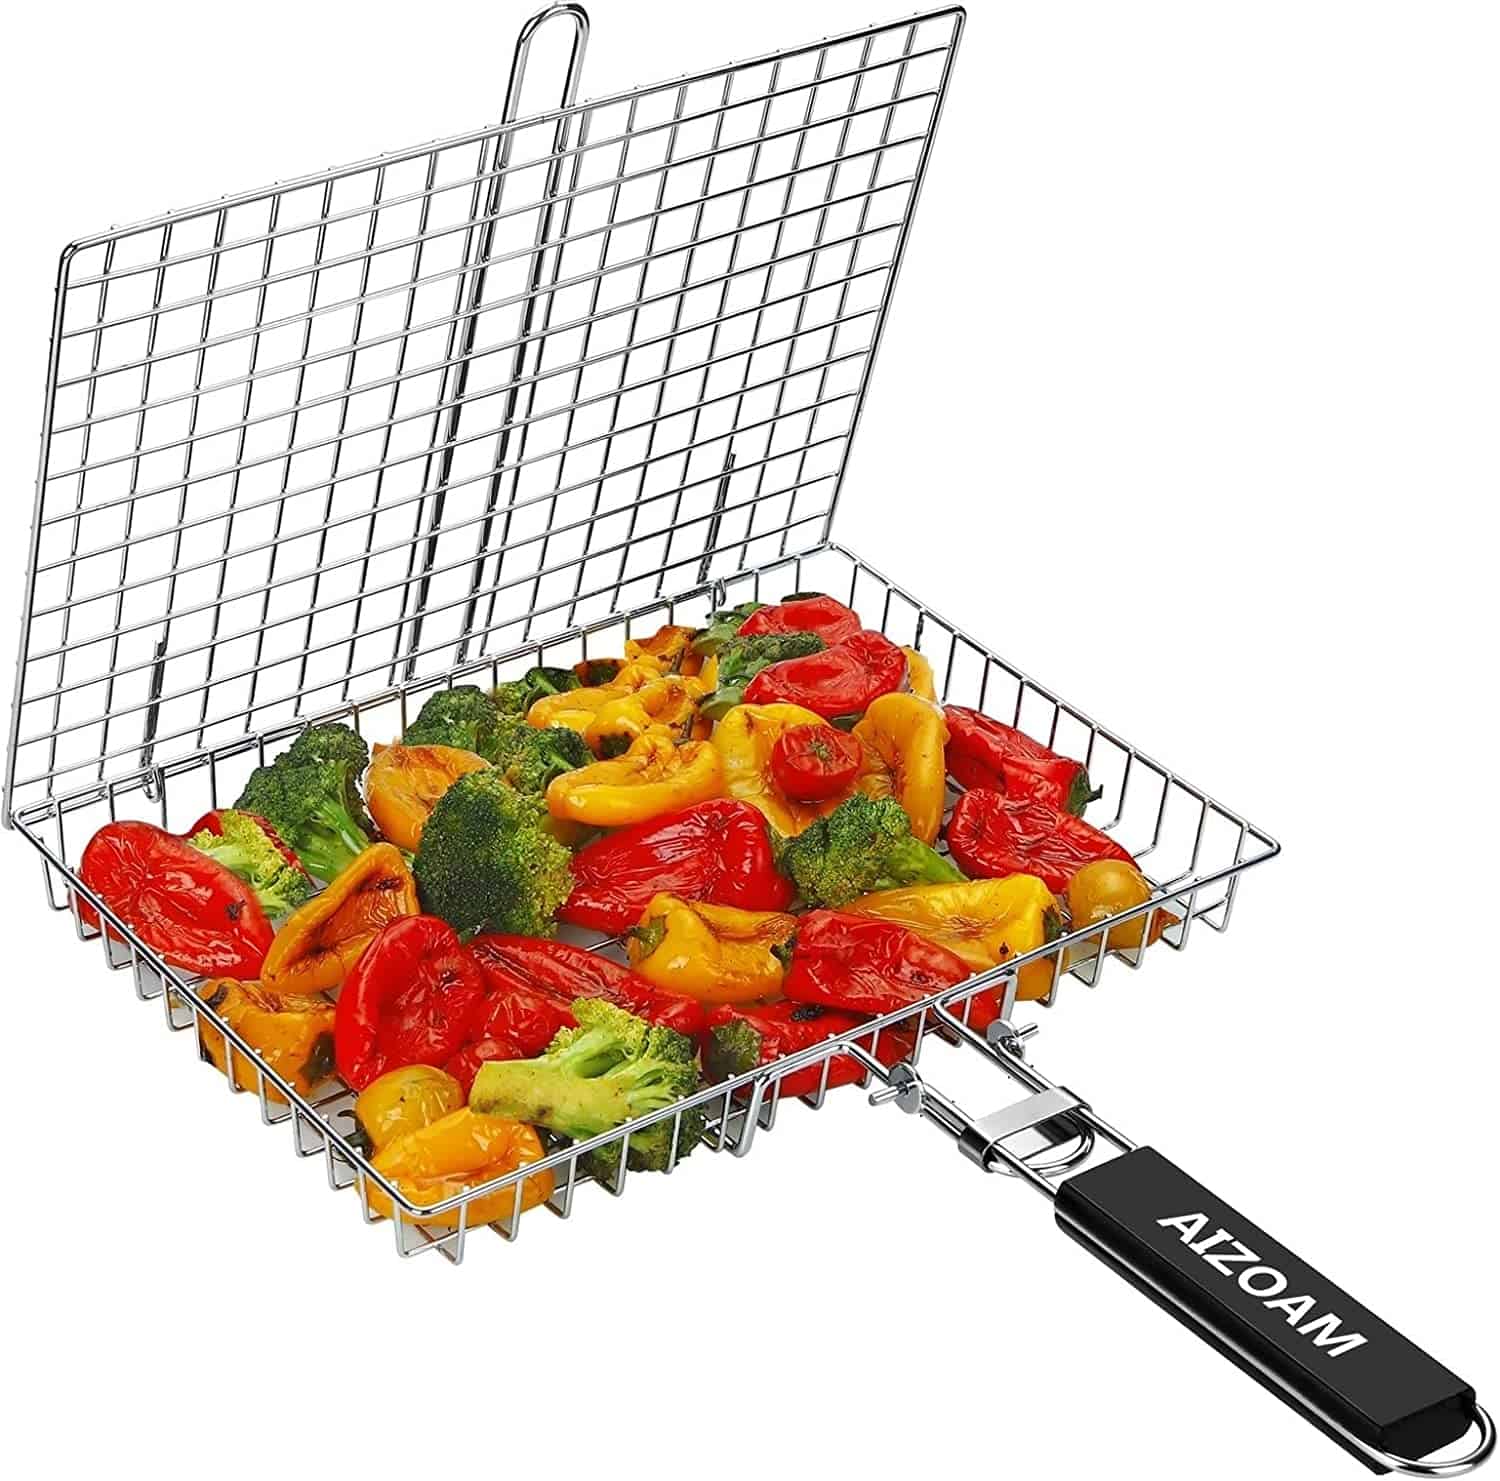 Stainless Steel BBQ Grilling Basket